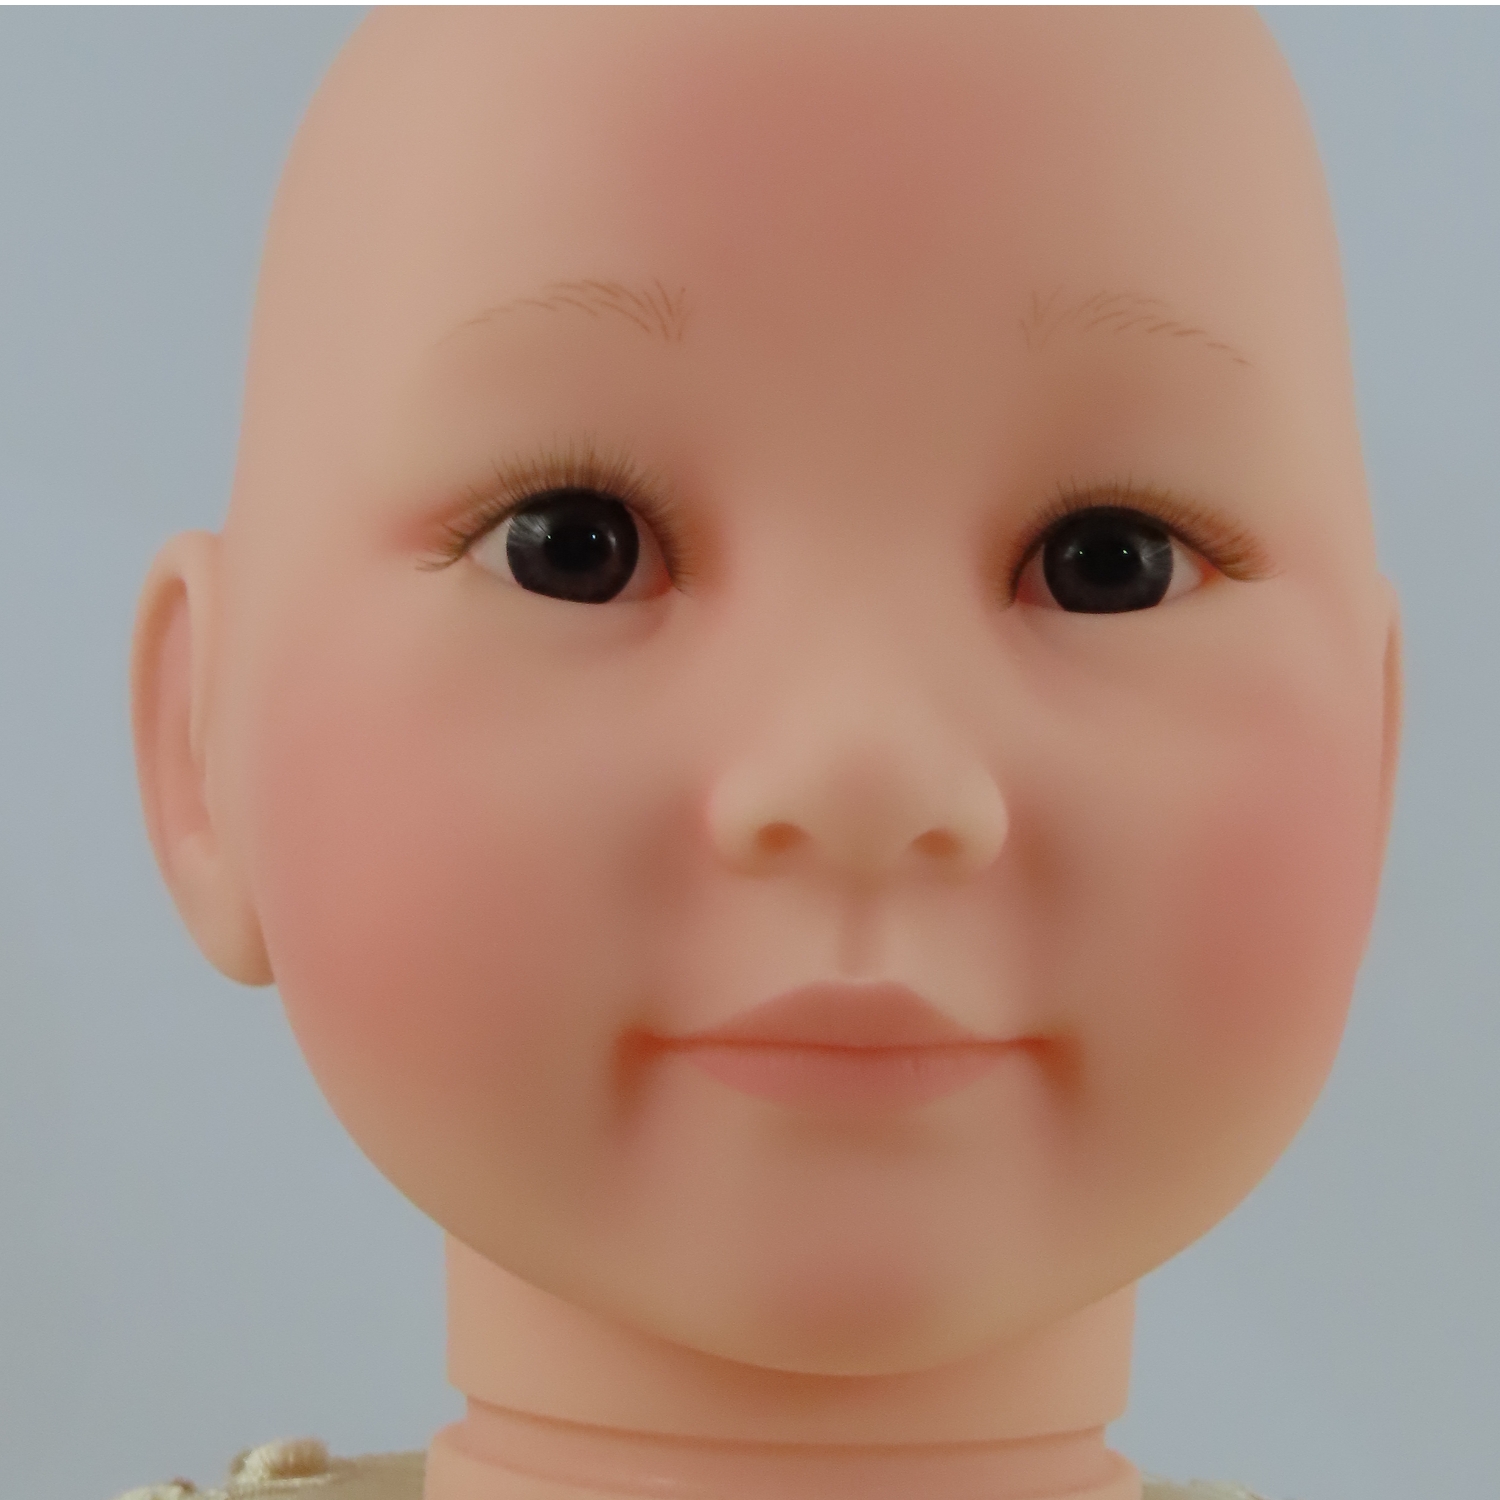 Milee Doll Kit for Creating Toddler and Baby Dolls That Look Real